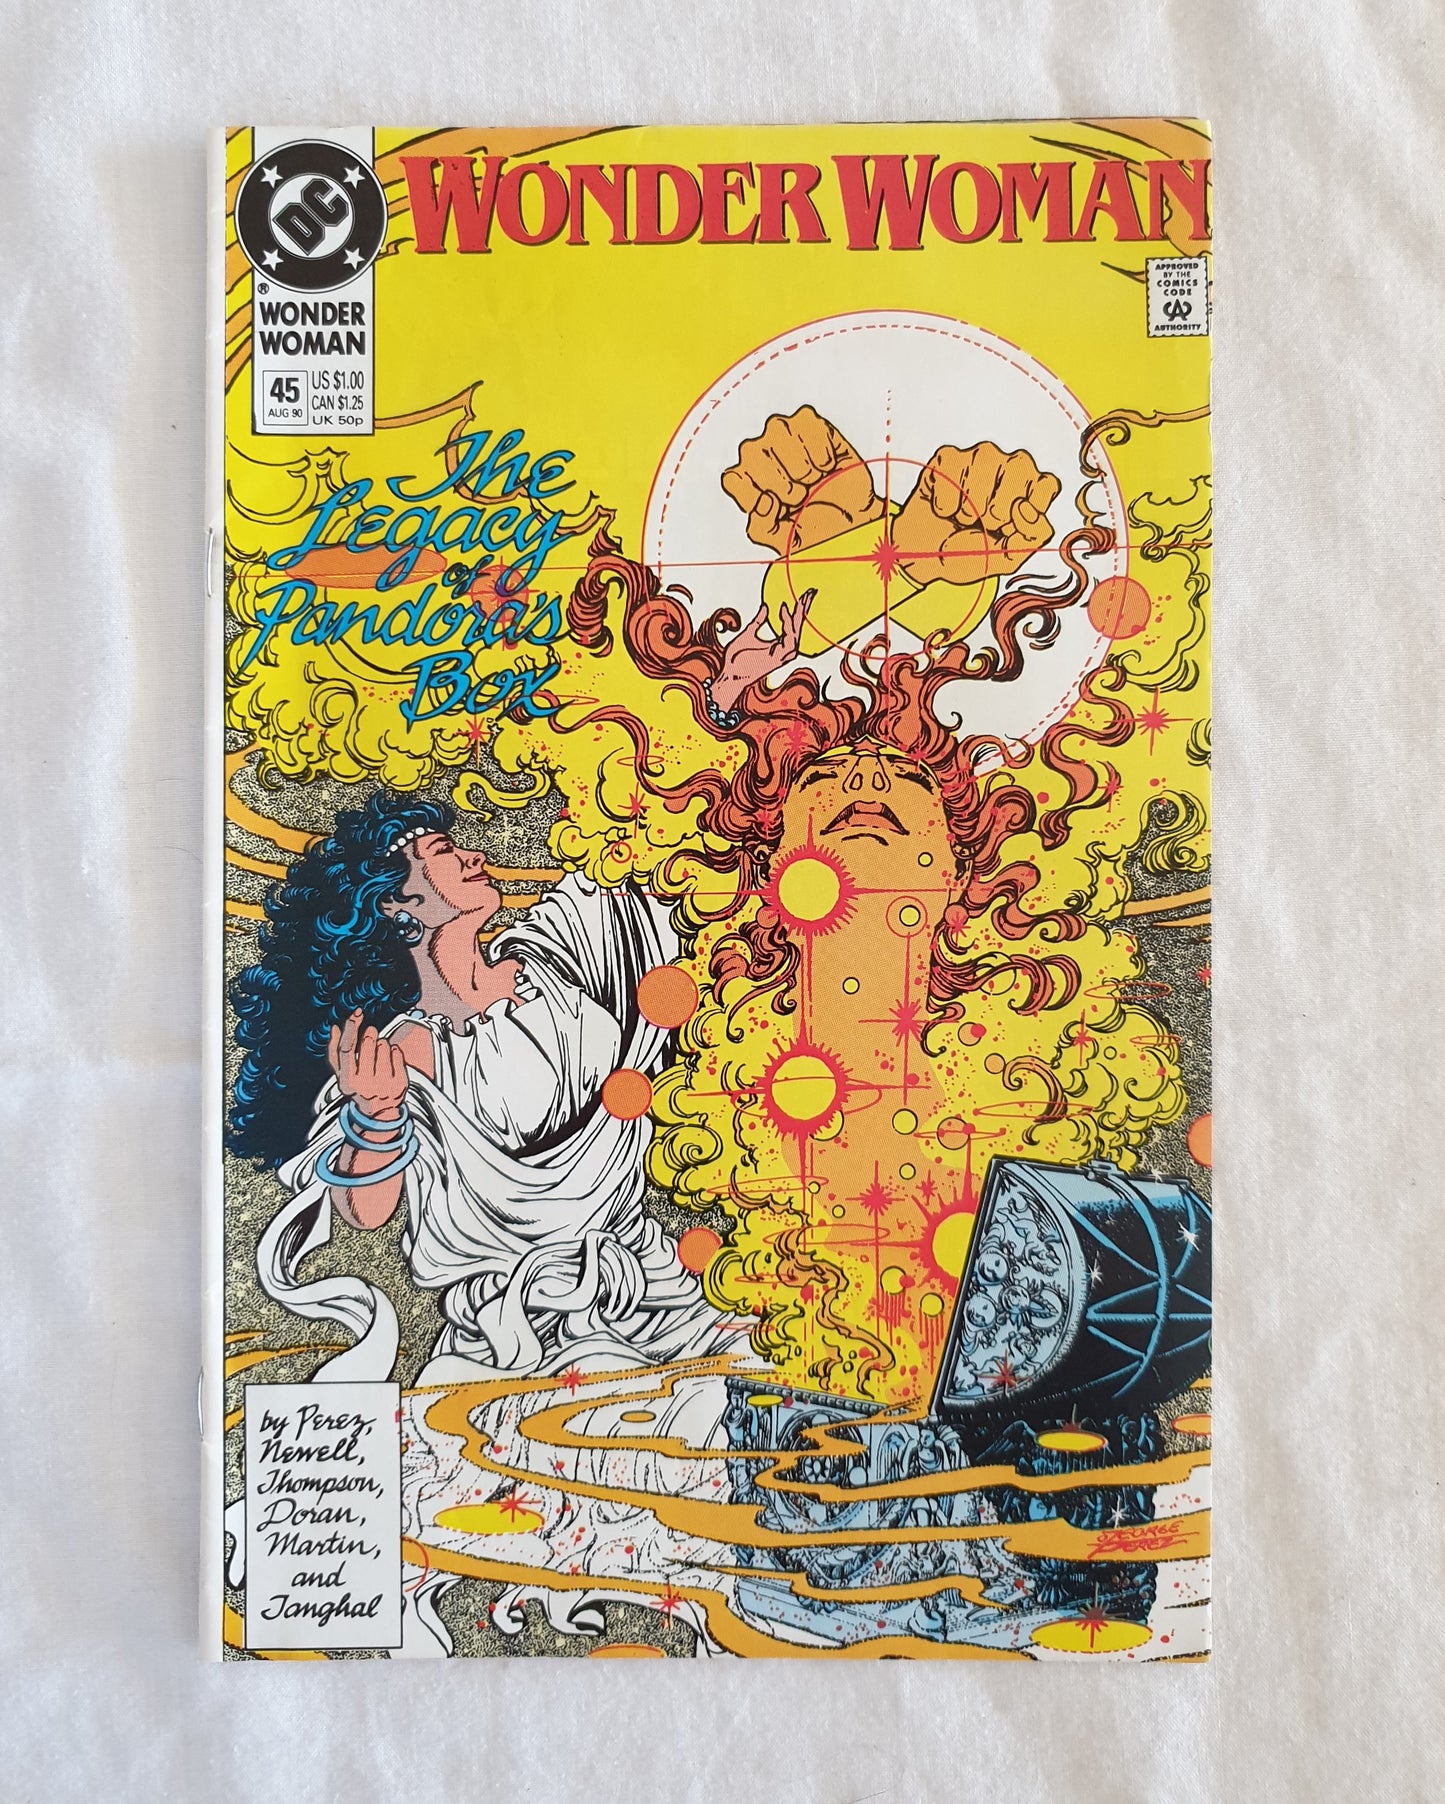 Wonder Woman #45 by George Perez and Mindy Newell - DC Comics